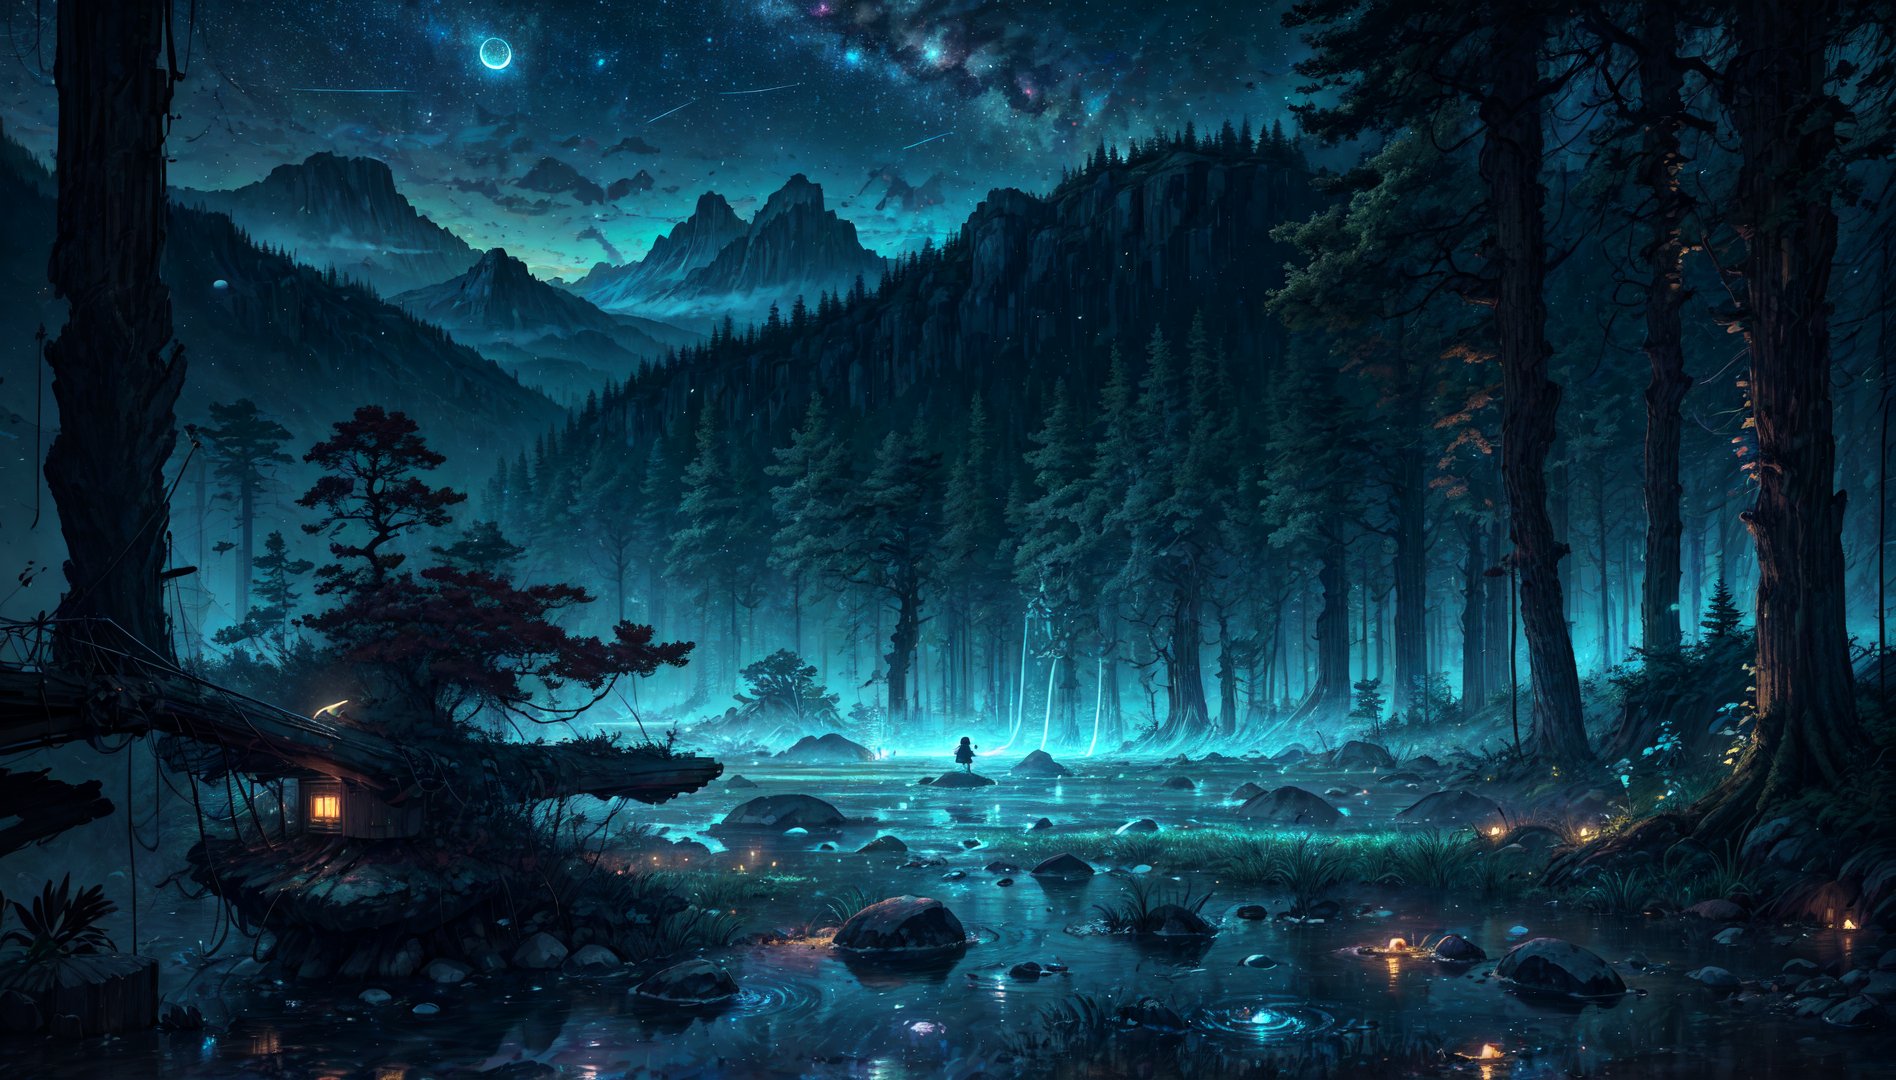 masterpiece, best quality, ultra-detailed, illustration, 1girl, solo, outdoors, camping, night, mountains, nature, stars, moon, bonfire, tent, twin ponytails, green eyes, cheerful, happy, backpack, sleeping bag, camping stove, water bottle, mountain boots, gloves, sweater, hat, flashlight, forest, rocks, river, wood, smoke, shadows, contrast, clear sky, constellations, Milky Way, peaceful, serene, quiet, tranquil, remote, secluded, adventurous, exploration, escape, independence, survival, resourcefulness, challenge, perseverance, stamina, endurance, observation, intuition, adaptability, creativity, imagination, artistry, inspiration, beauty, awe, wonder, gratitude, appreciation, relaxation, enjoyment, rejuvenation, mindfulness, awareness, connection, harmony, balance, texture, detail, realism, depth, perspective, composition, color, light, shadow, reflection, refraction, tone, contrast, foreground, middle ground, background, naturalistic, figurative, representational, impressionistic, expressionistic, abstract, innovative, experimental, unique